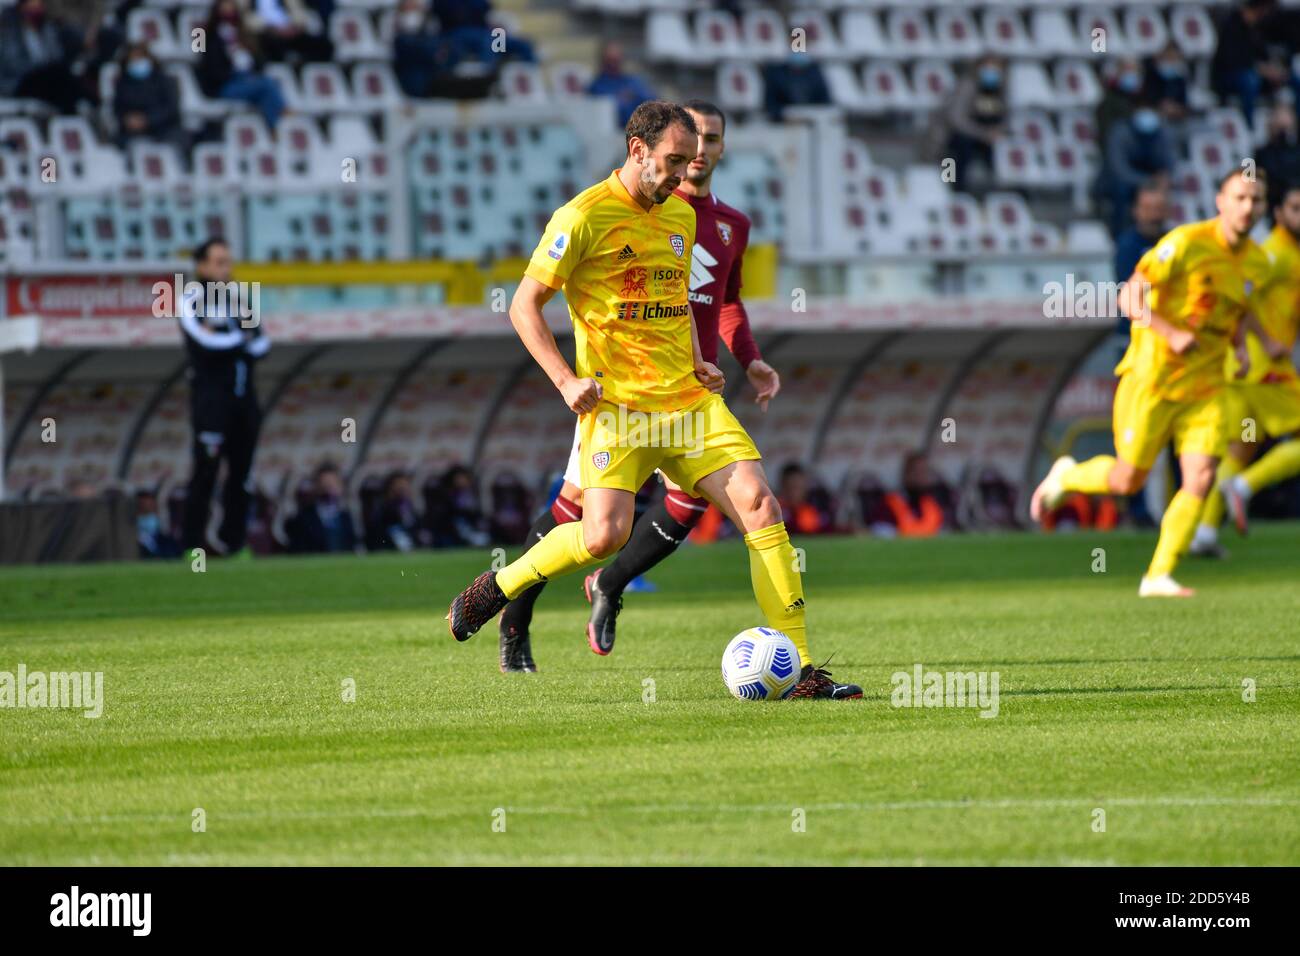 Torino, Italy. 18th, October 2020. Diego Godin (2) of Cagliari seen in the Serie A match between Torino and Cagliari at Stadio Olimpico in Torino. (Photo credit: Gonzales Photo - Tommaso Fimiano). Stock Photo